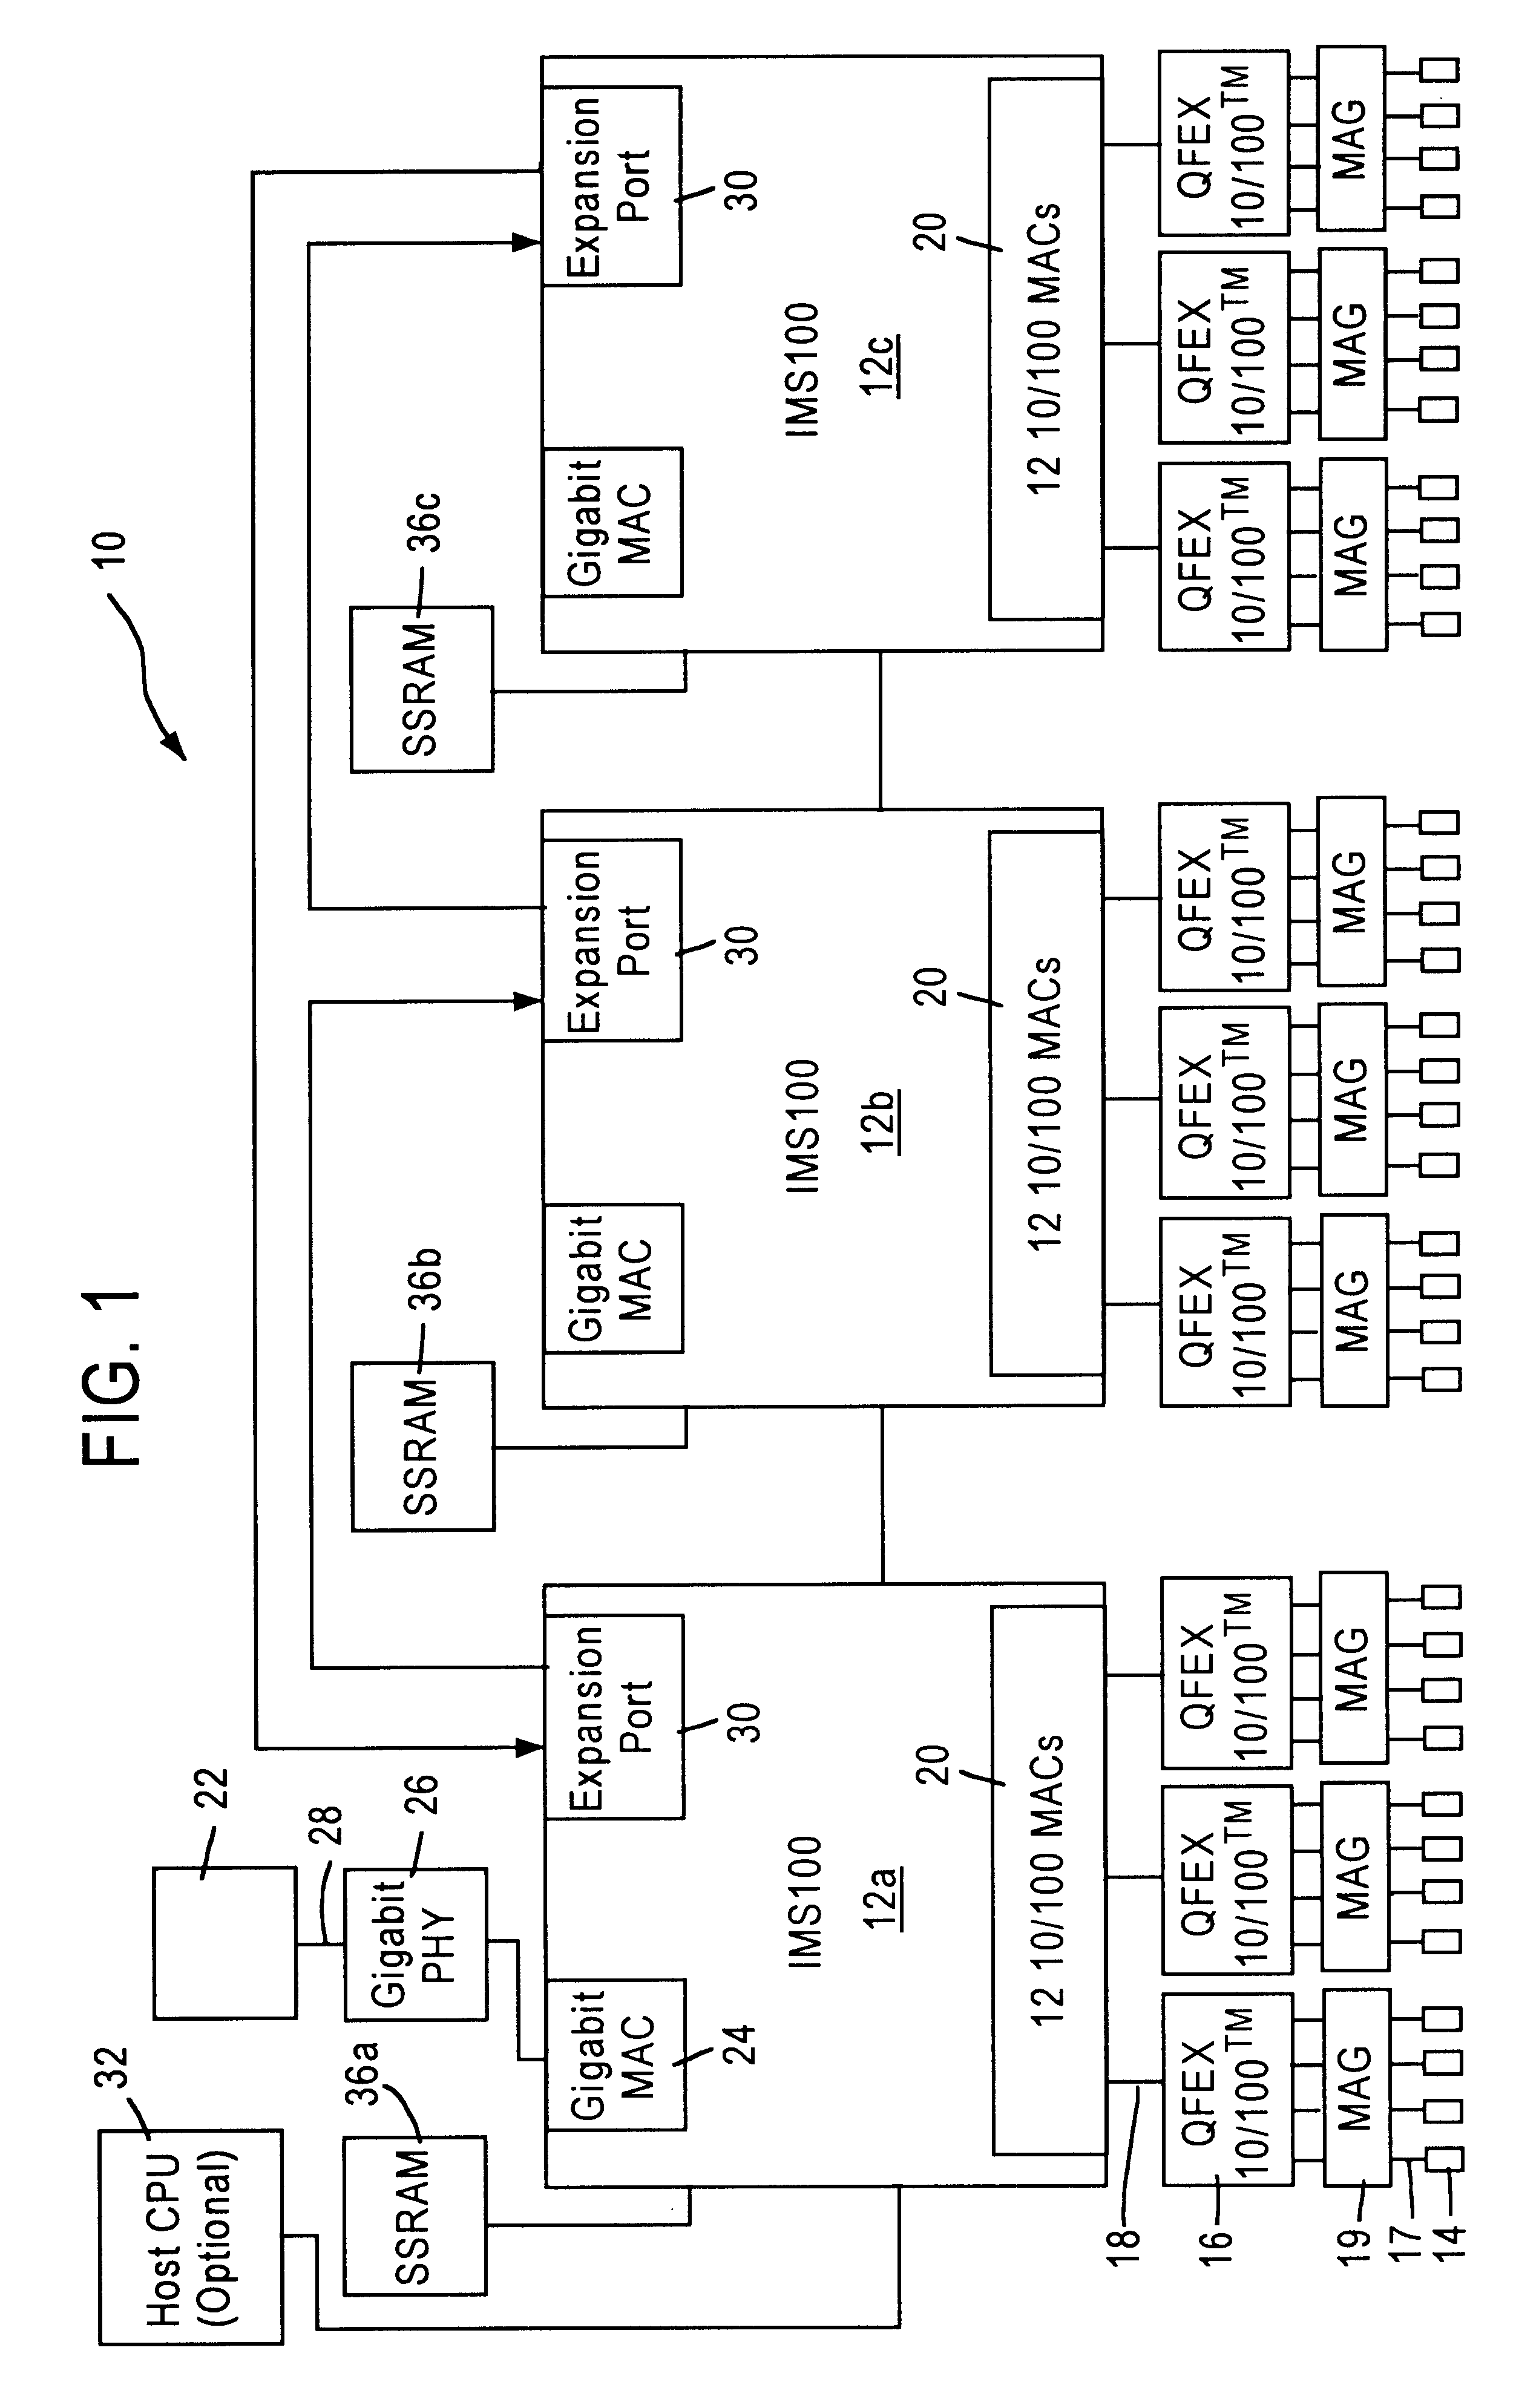 Method and apparatus for port vector determination at egress